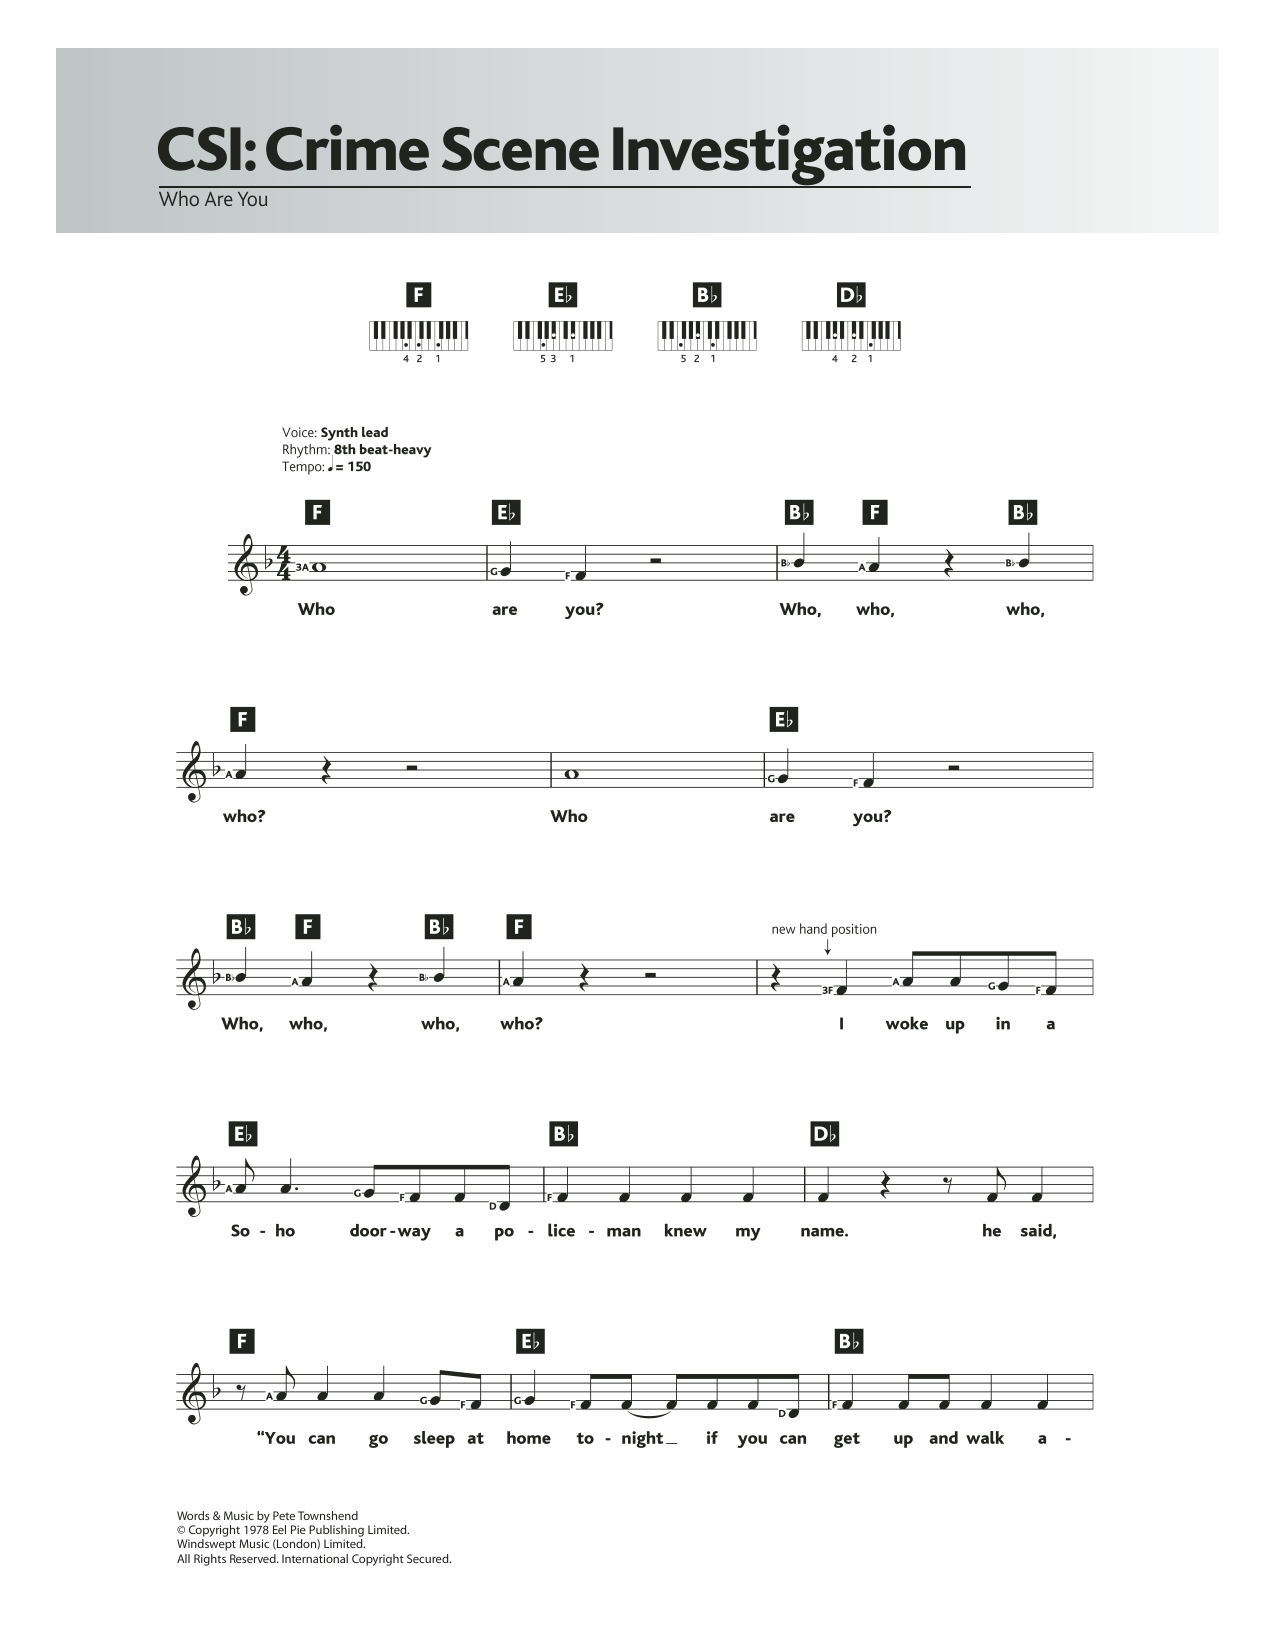 Download The Who Who Are You? Sheet Music